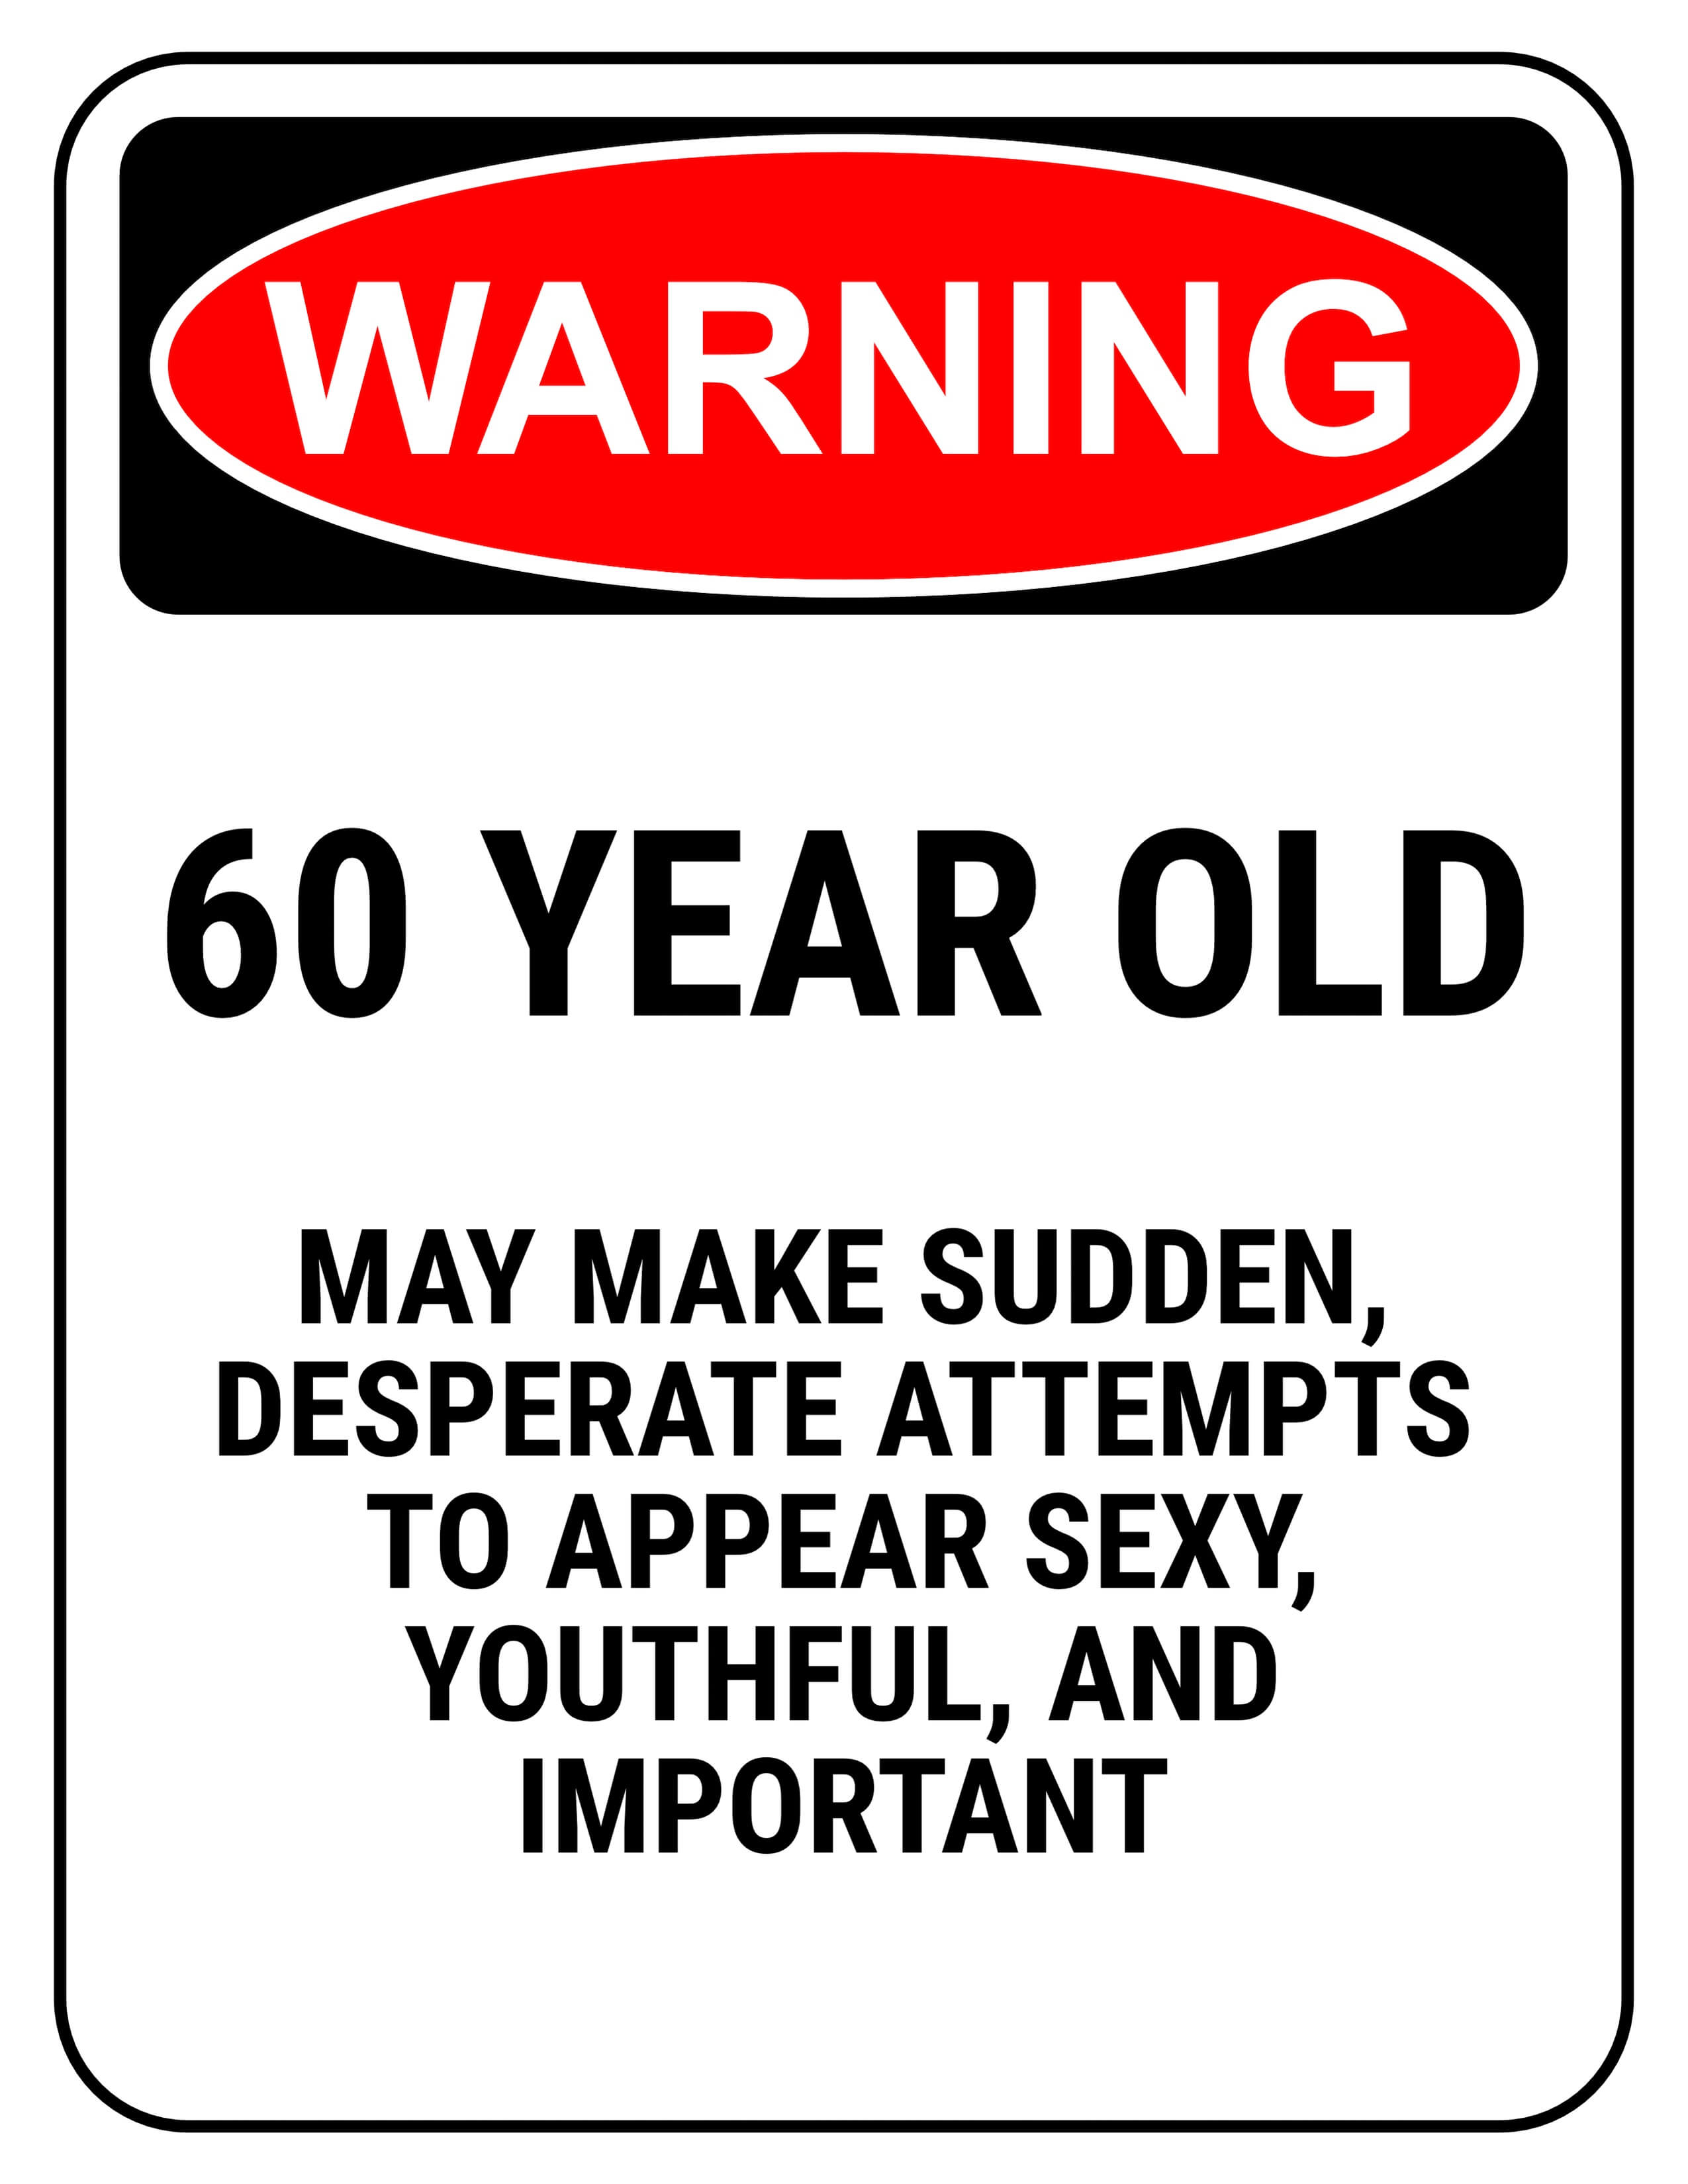 Funny Safety Signs to Download and Print